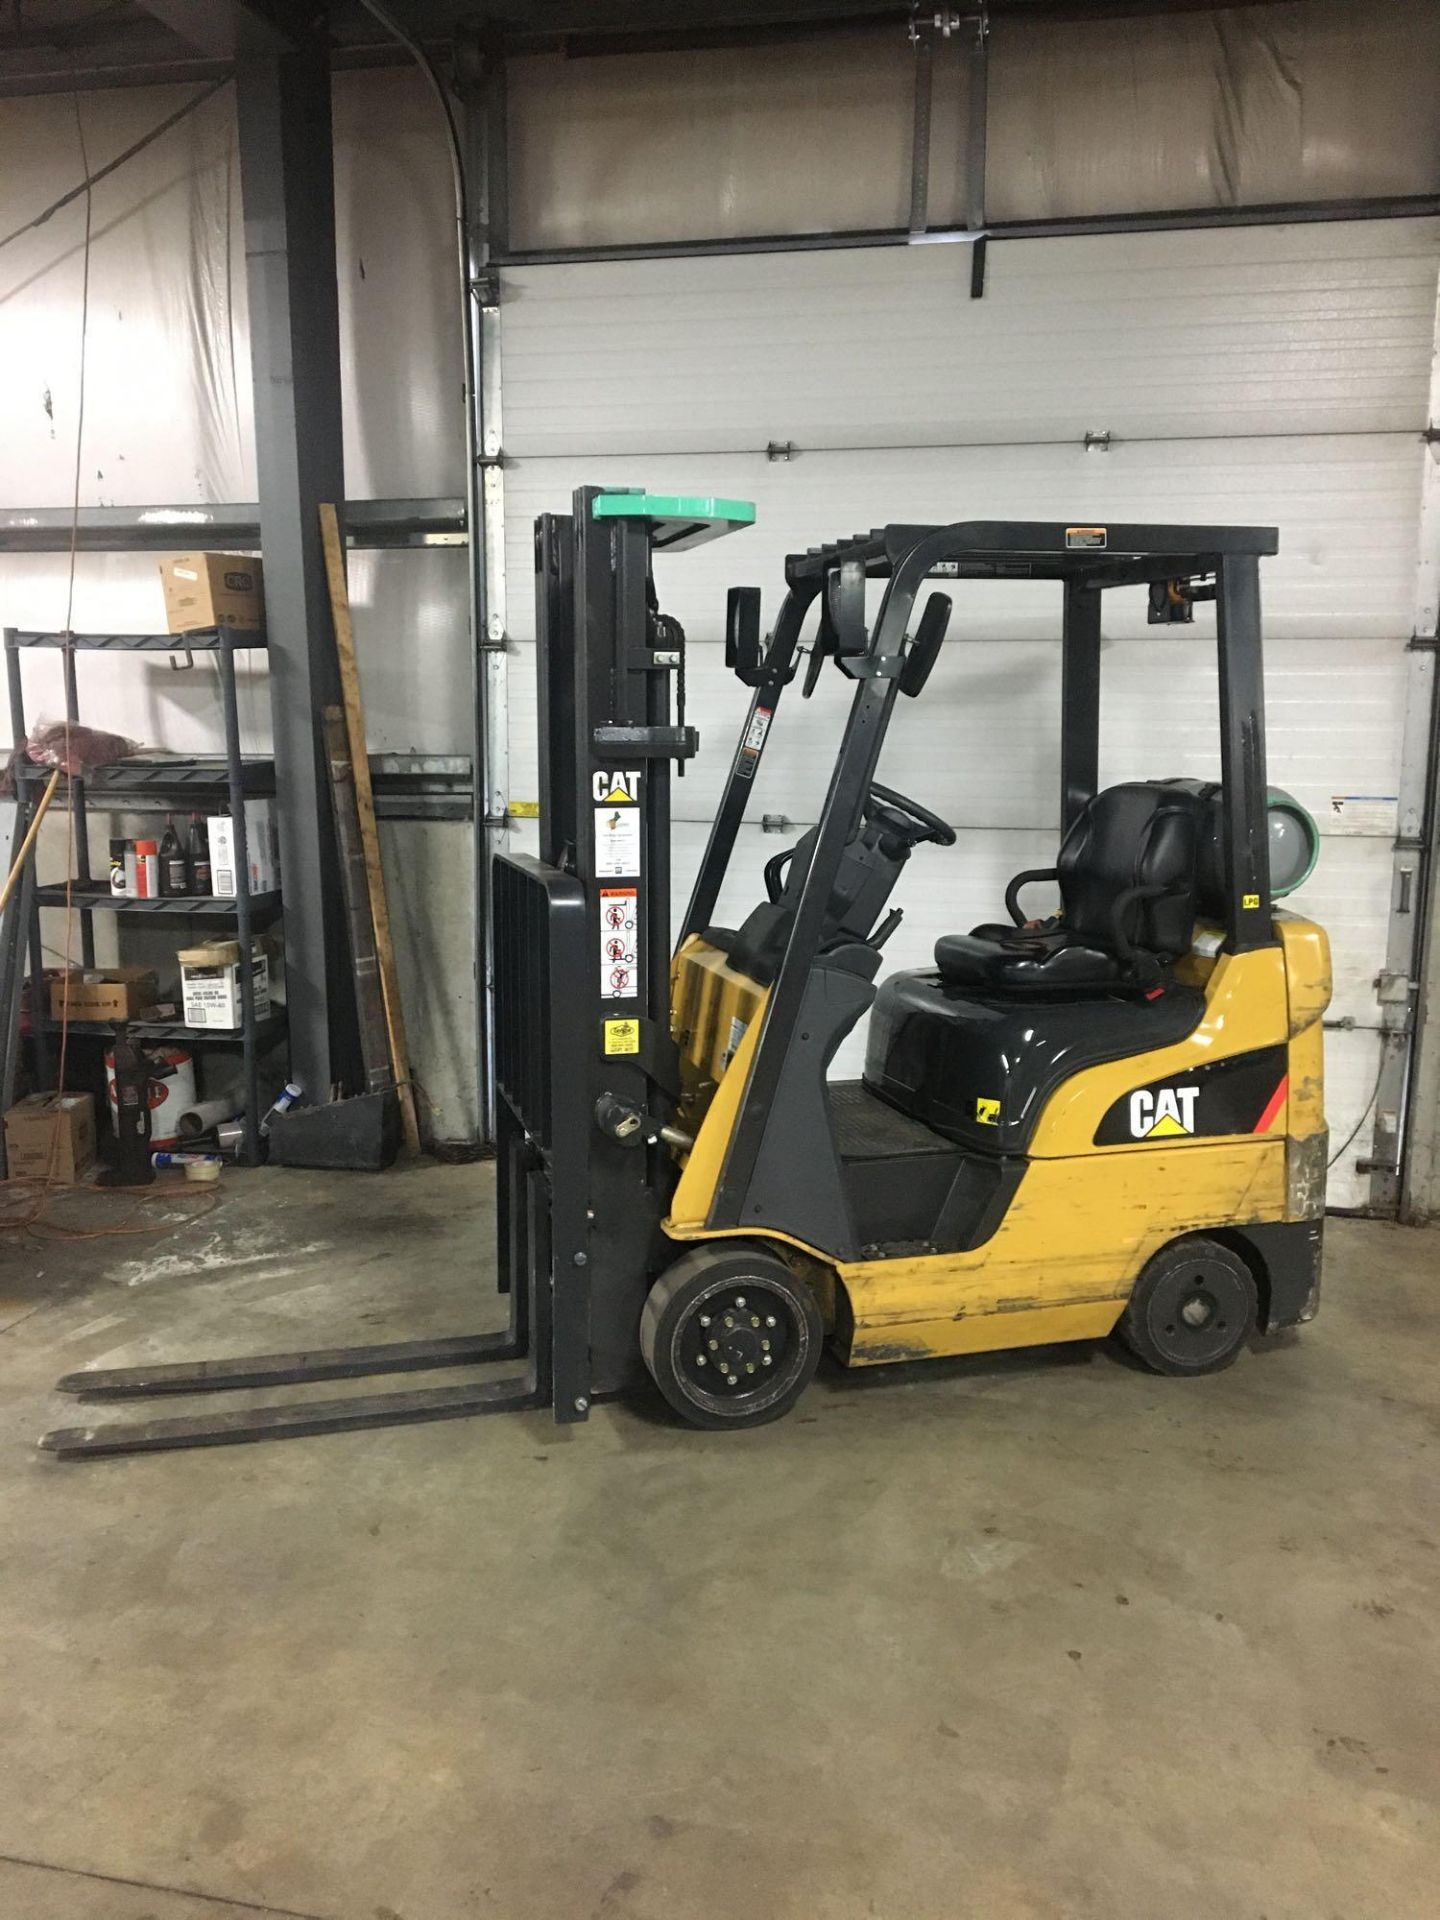 Propane Forklift, Caterpillar, 2C3500, Max Ht 187", Max Cap 2700lbs, 2082 Hrs Started and Moved